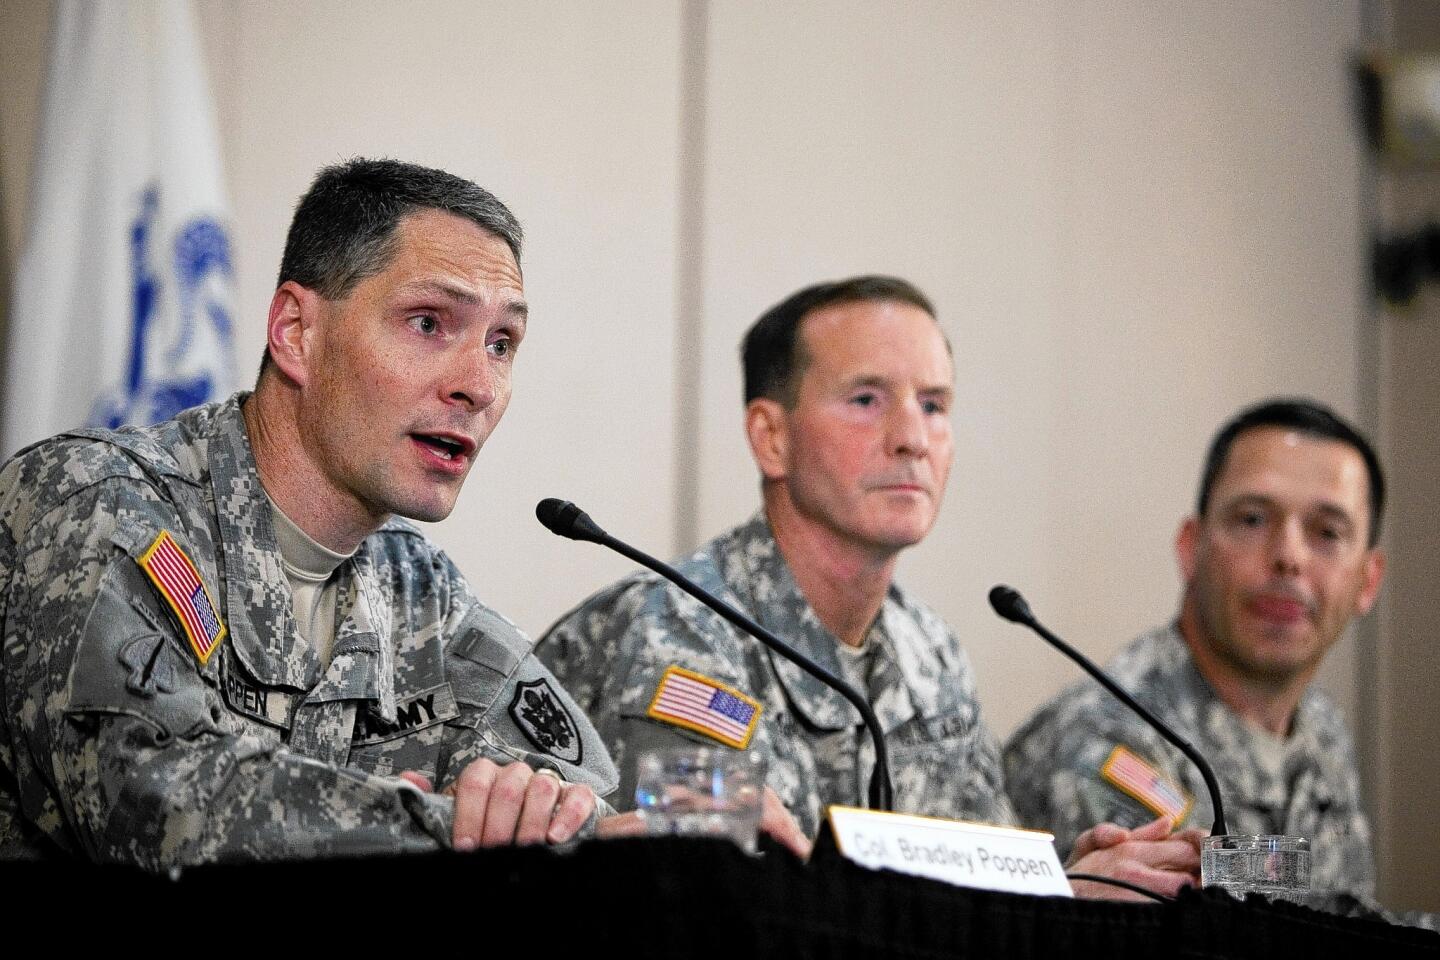 Col. Bradley Poppen, left, Maj. Gen. Joseph P. DiSalvo and Col. Ronald Wool discuss the condition of Sgt Bowe Bergdahl at a news conference at Ft. Sam Houston in San Antonio.